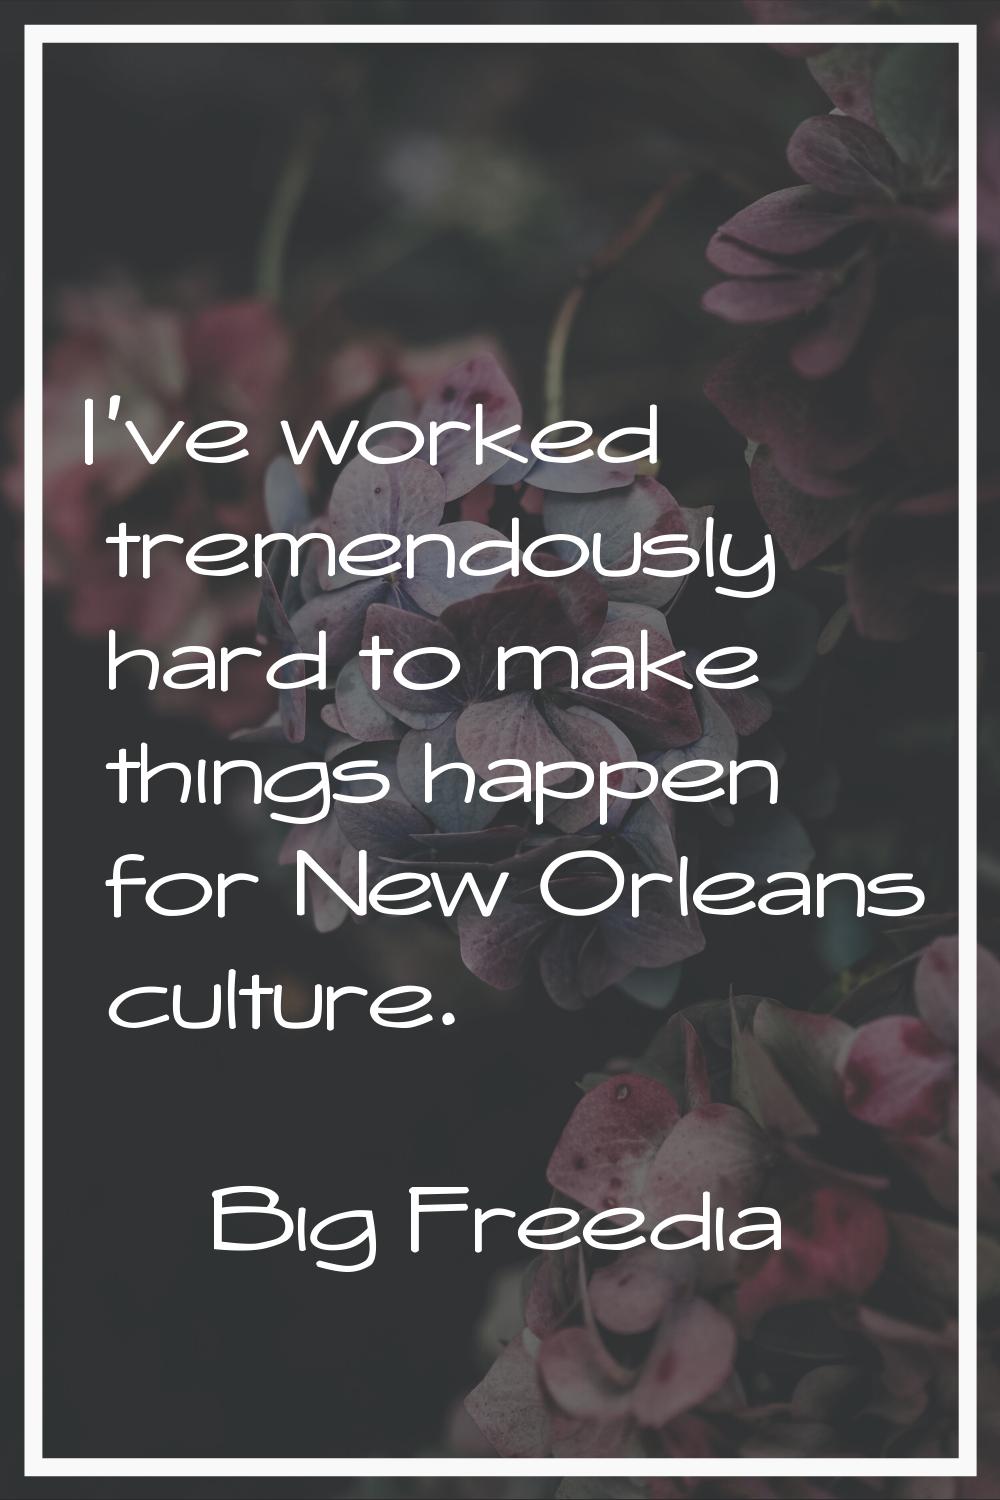 I've worked tremendously hard to make things happen for New Orleans culture.